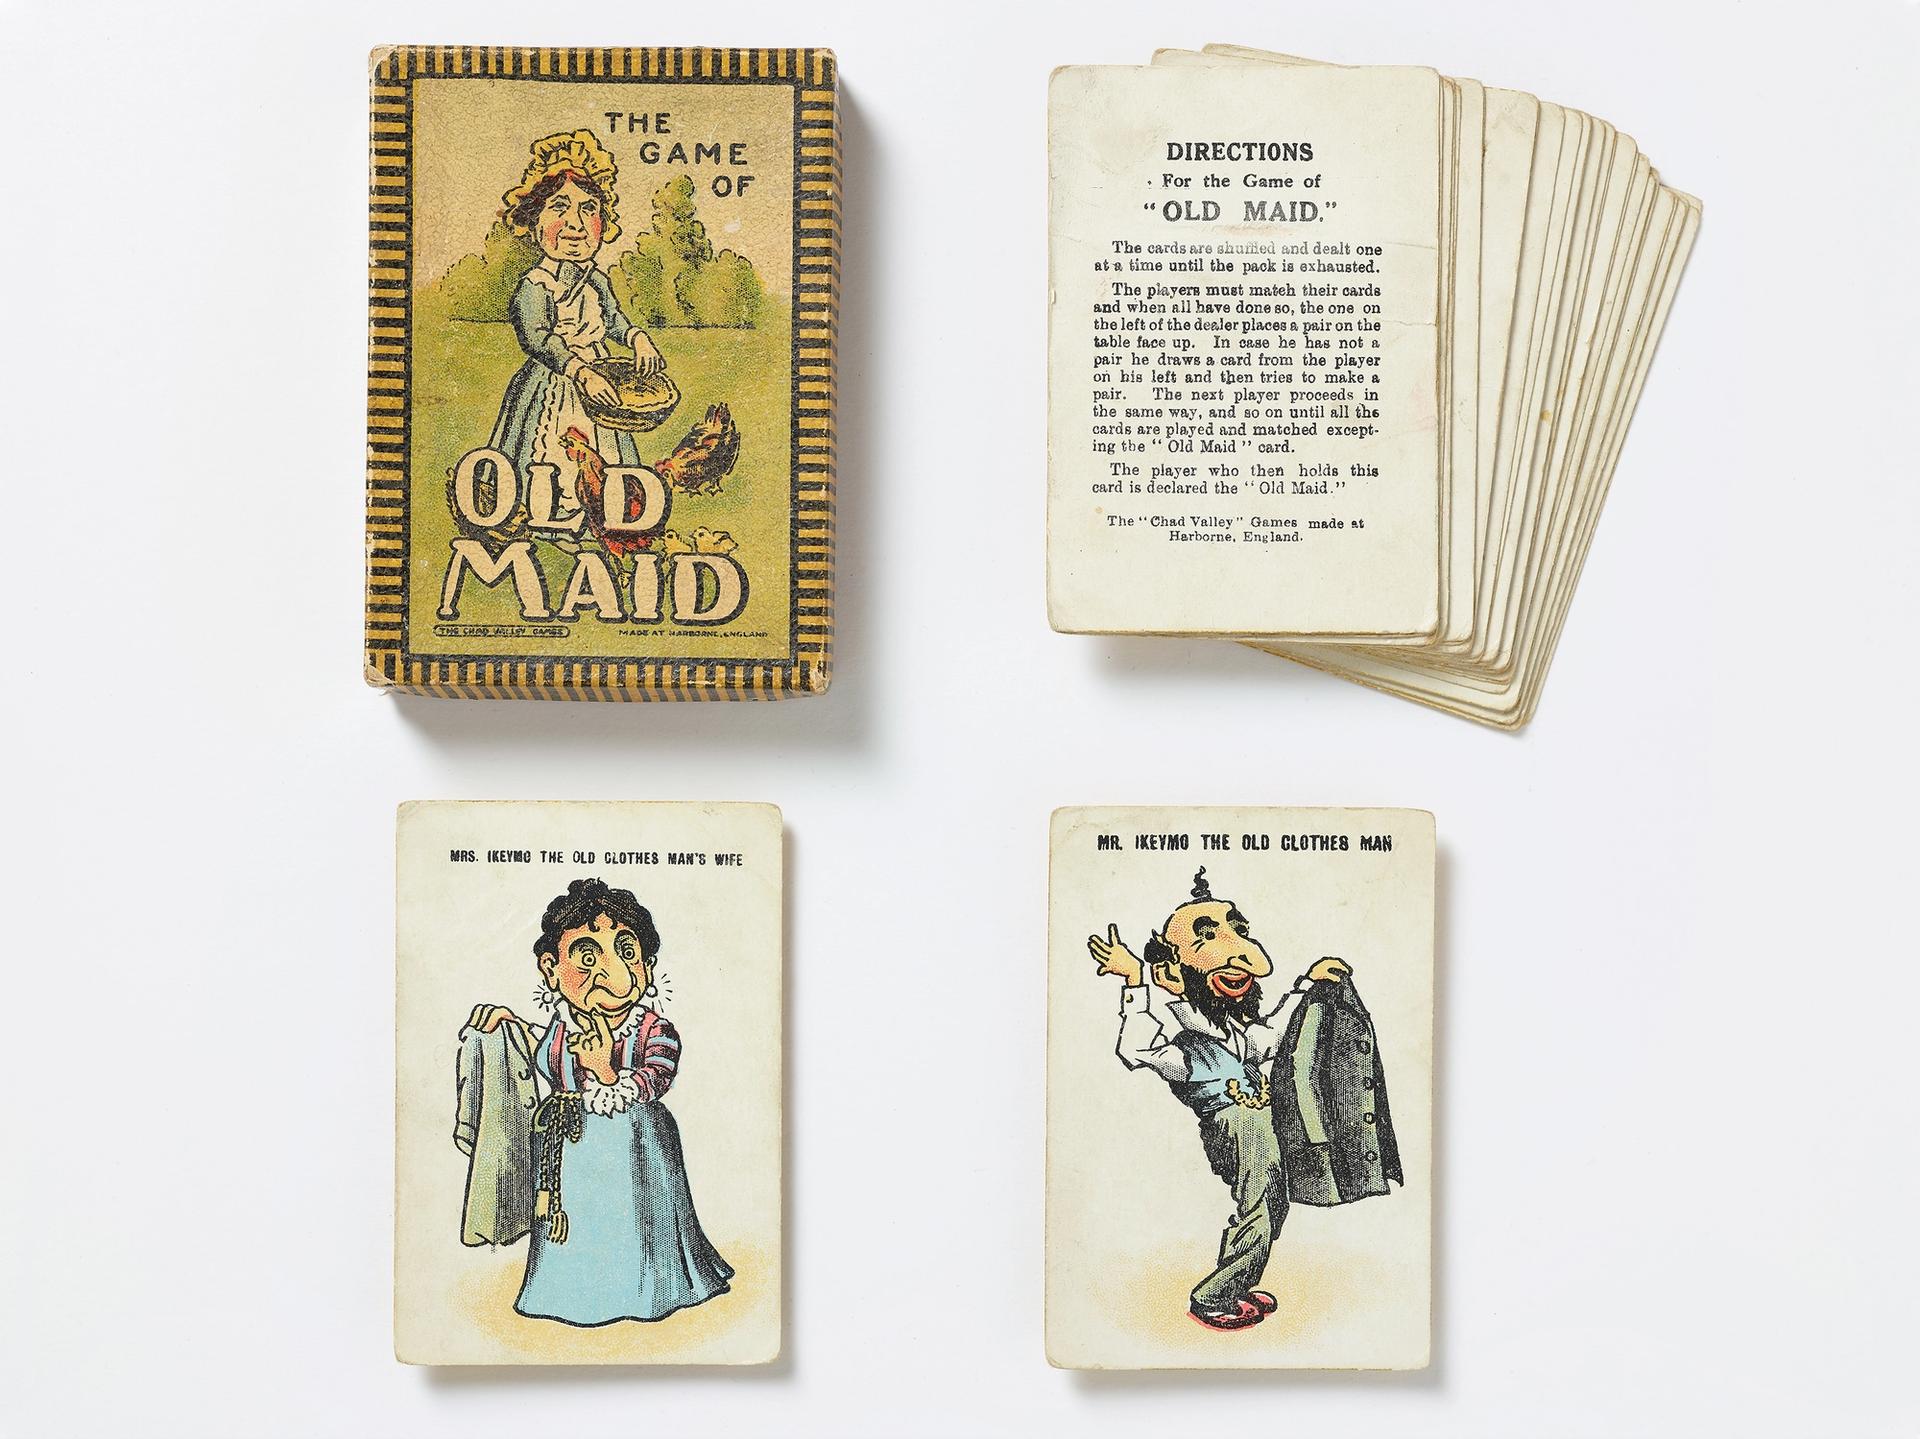 An anti-Semitic version of the card game Old Maid dating from around 1920. © Deutsches Historisches Museum